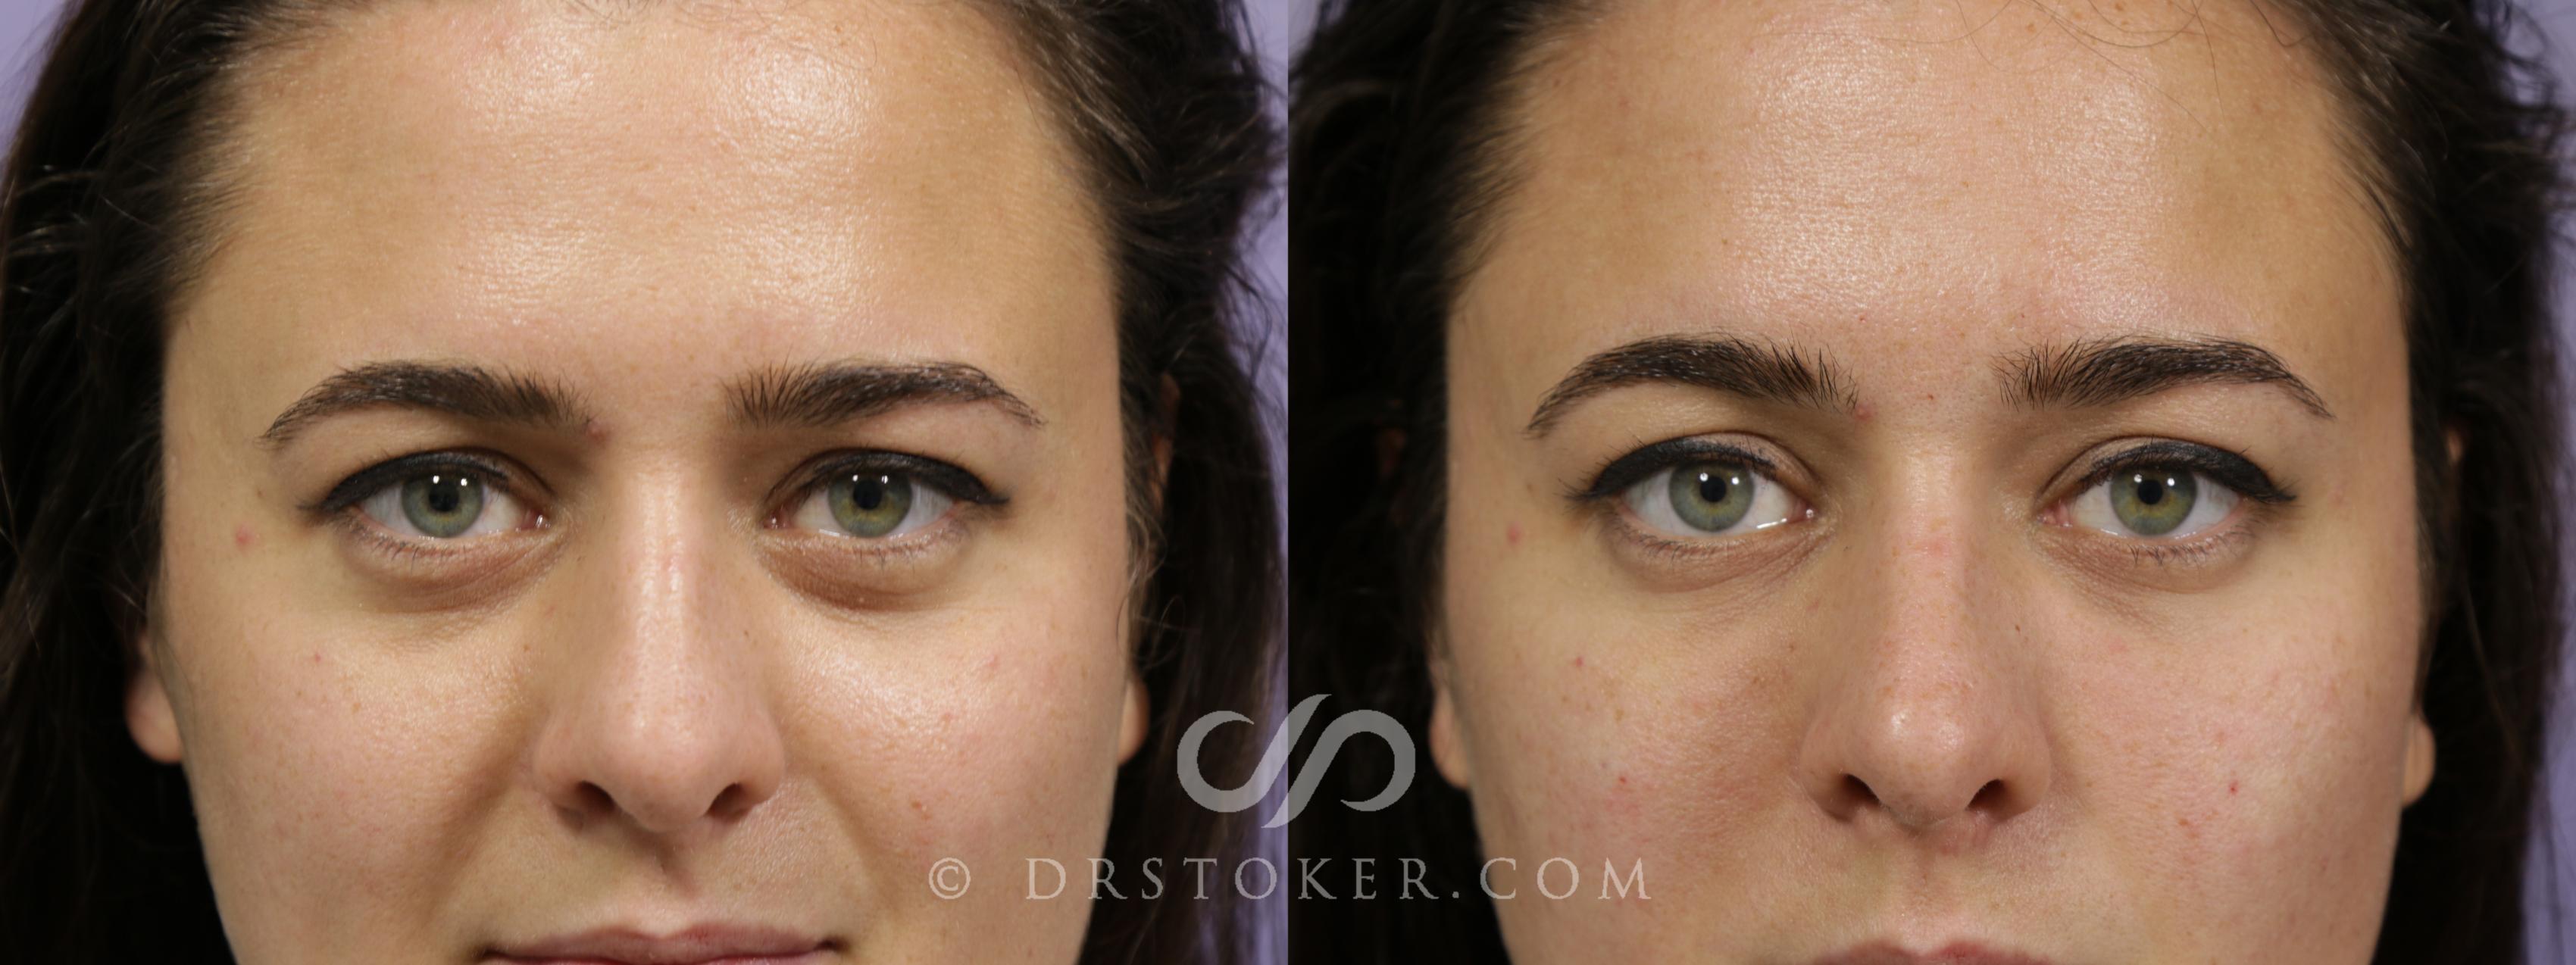 Before & After Undereye Fillers Case 1883 Front View in Los Angeles, CA